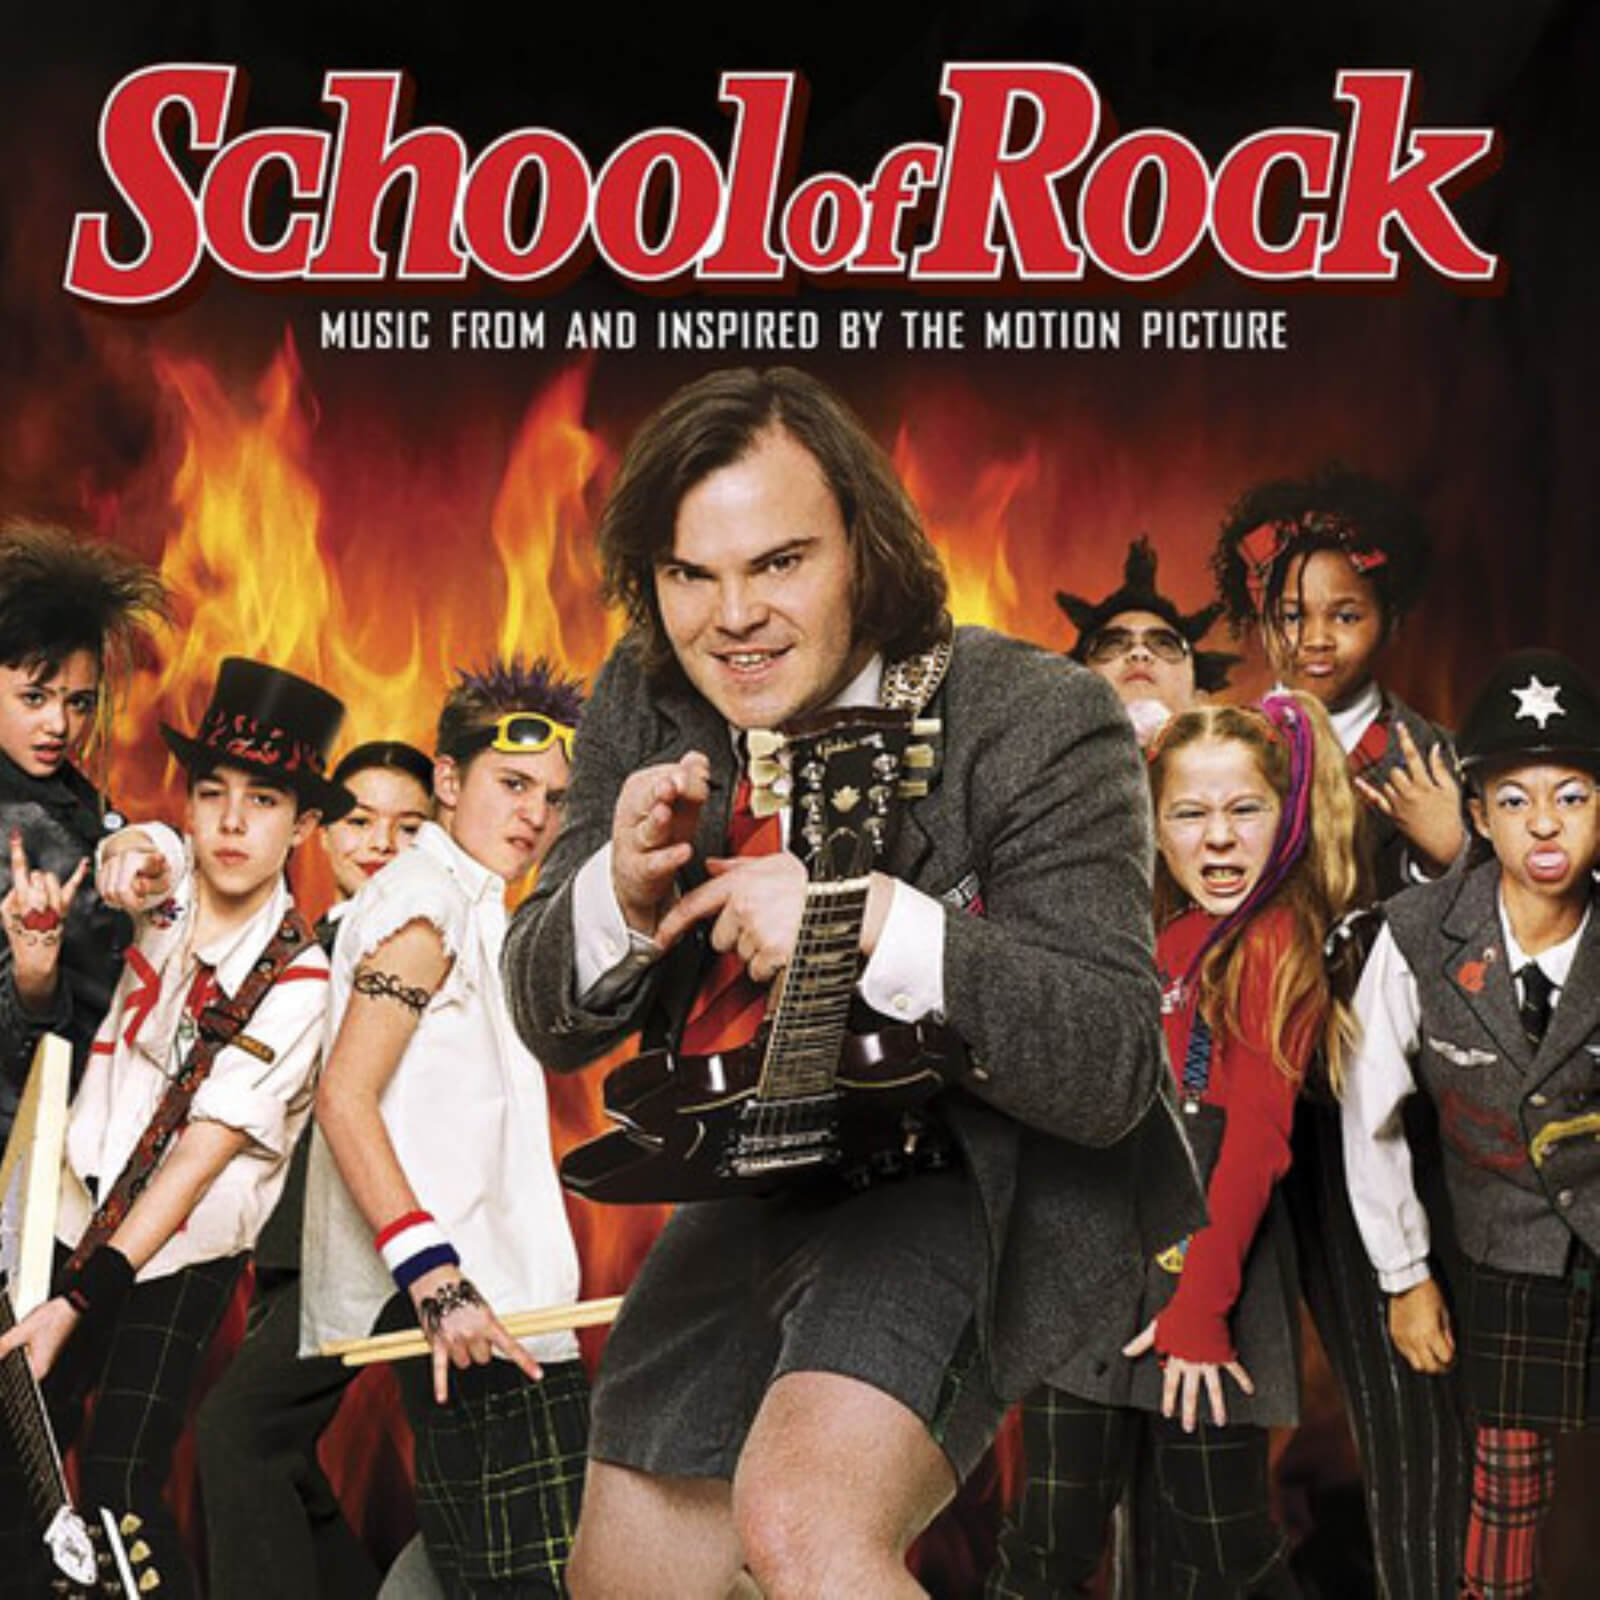 School of Rock (Music From and Inspired by Motion Picture) 140g Vinyl 2LP (Orange)